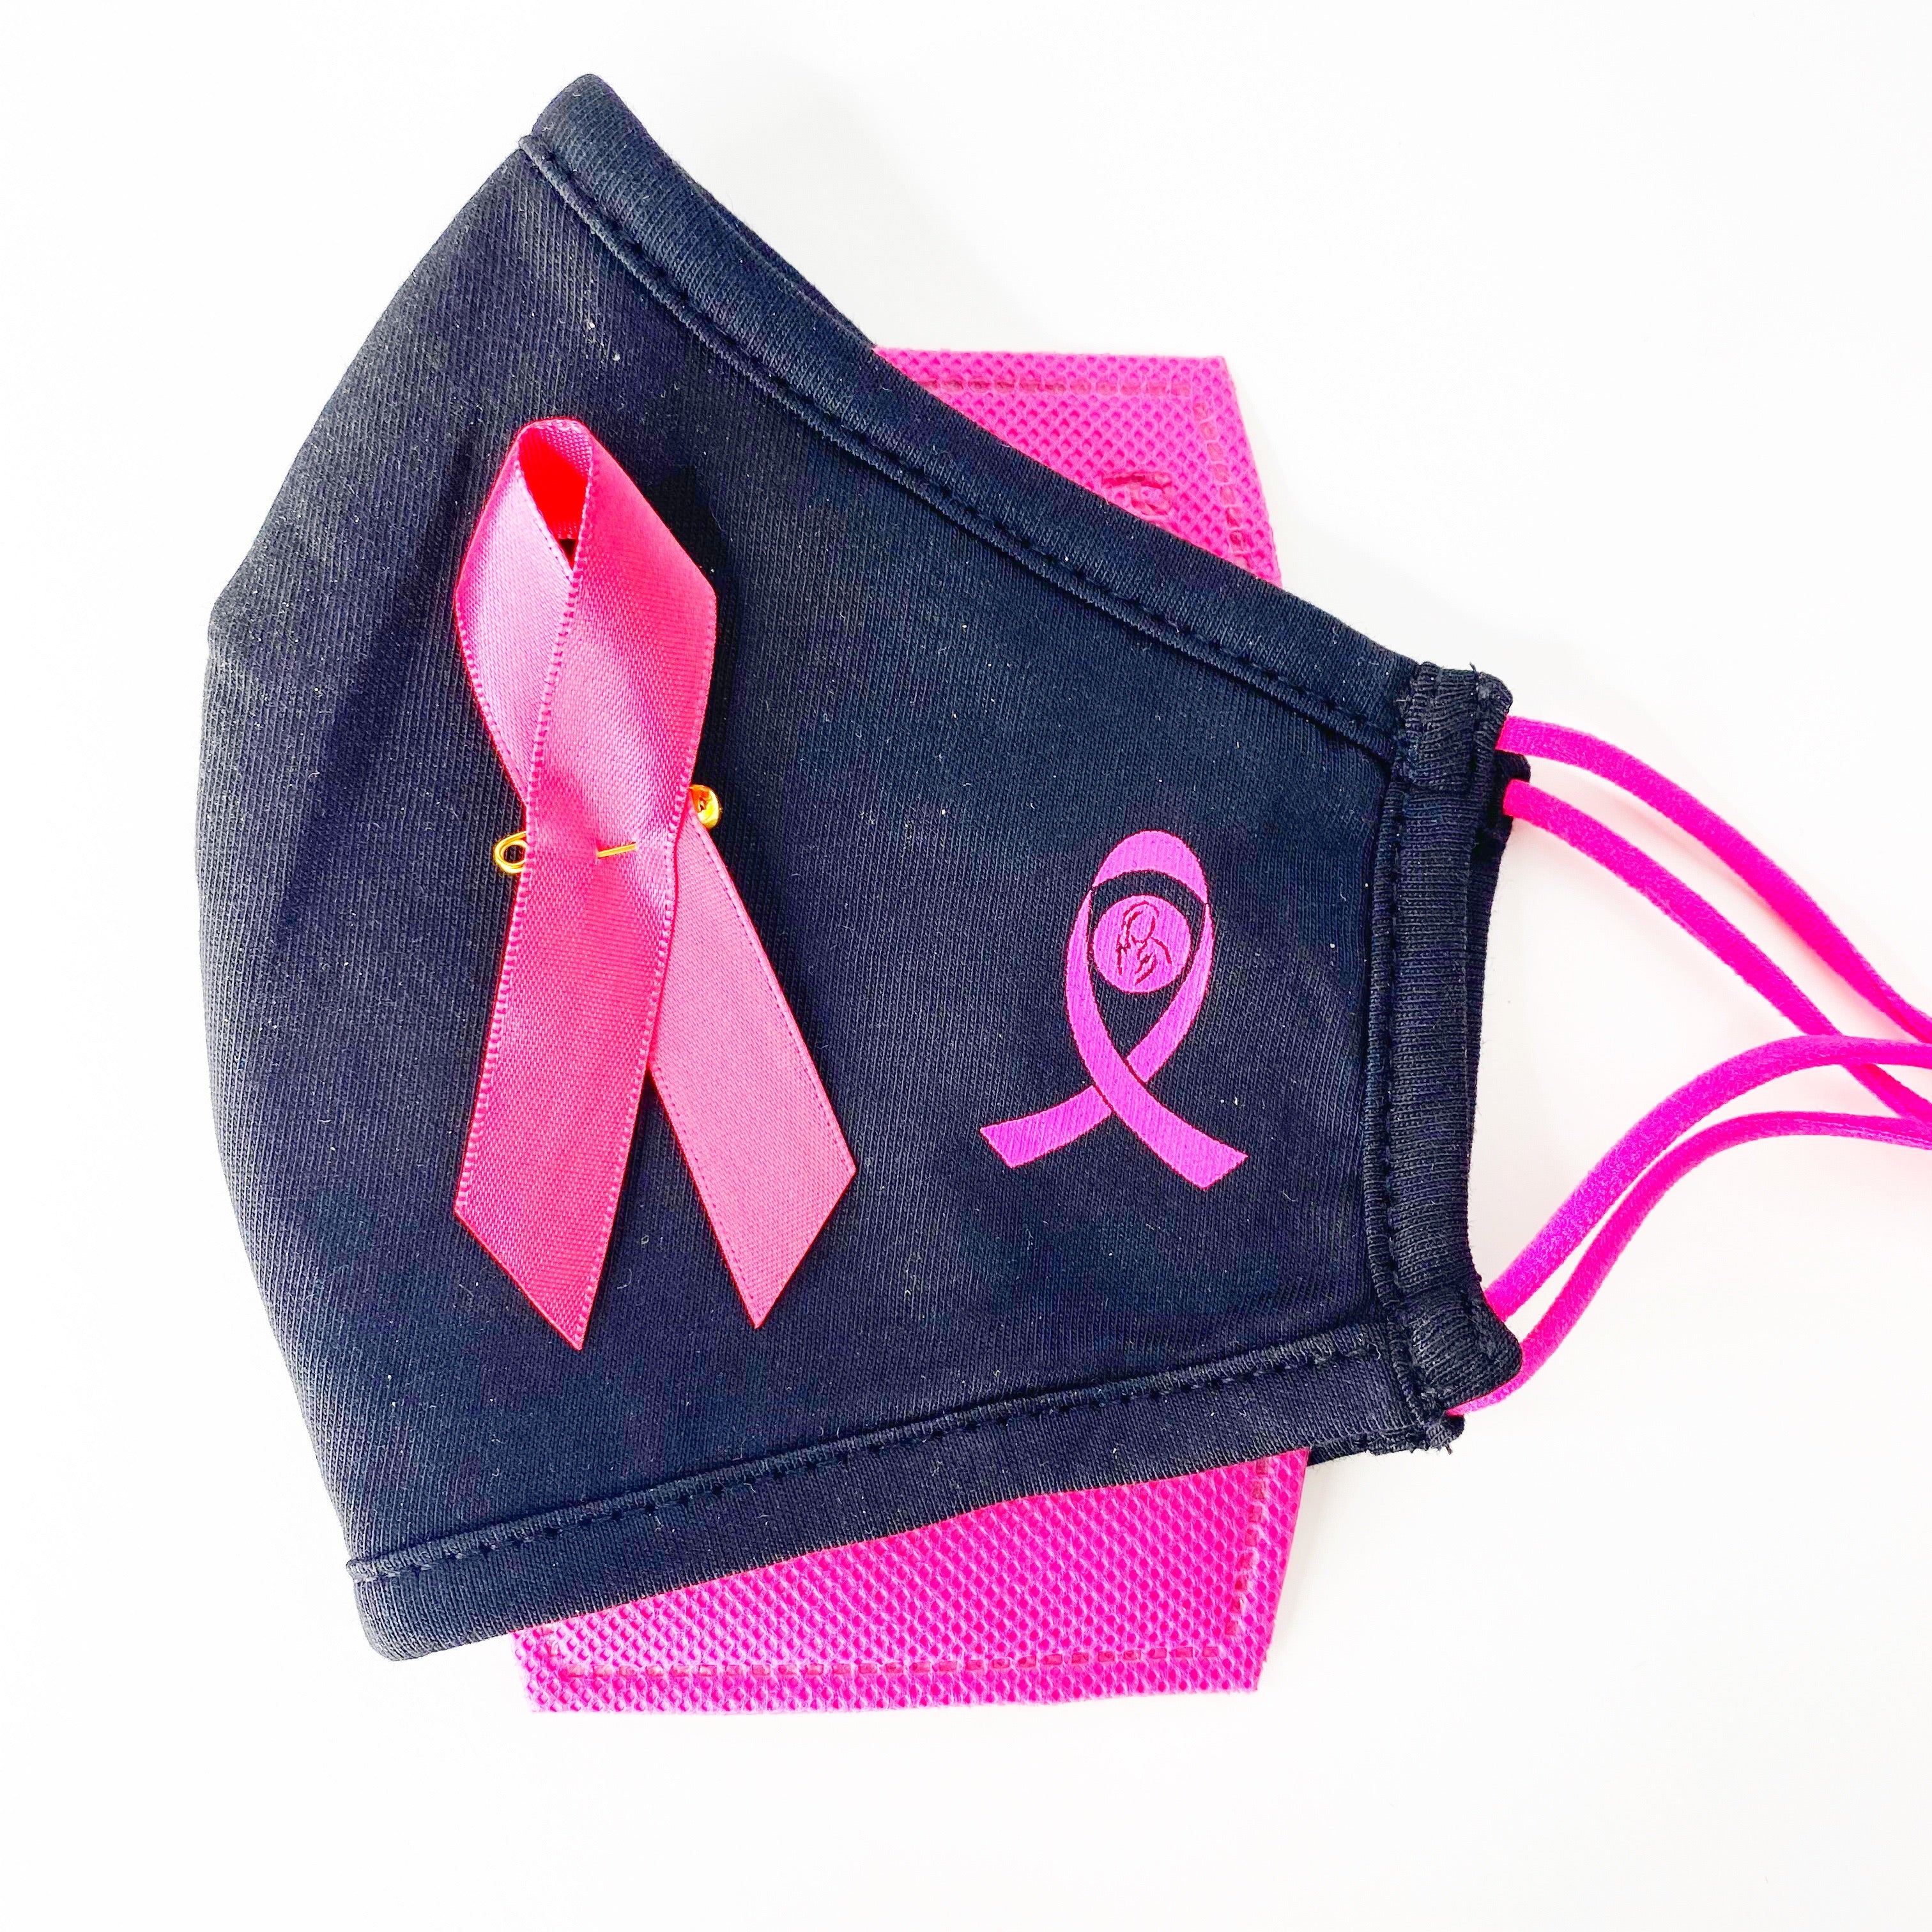 3 Layer Organic Cotton Breast Cancer Awareness Pink Ribbon Face Mask Canada